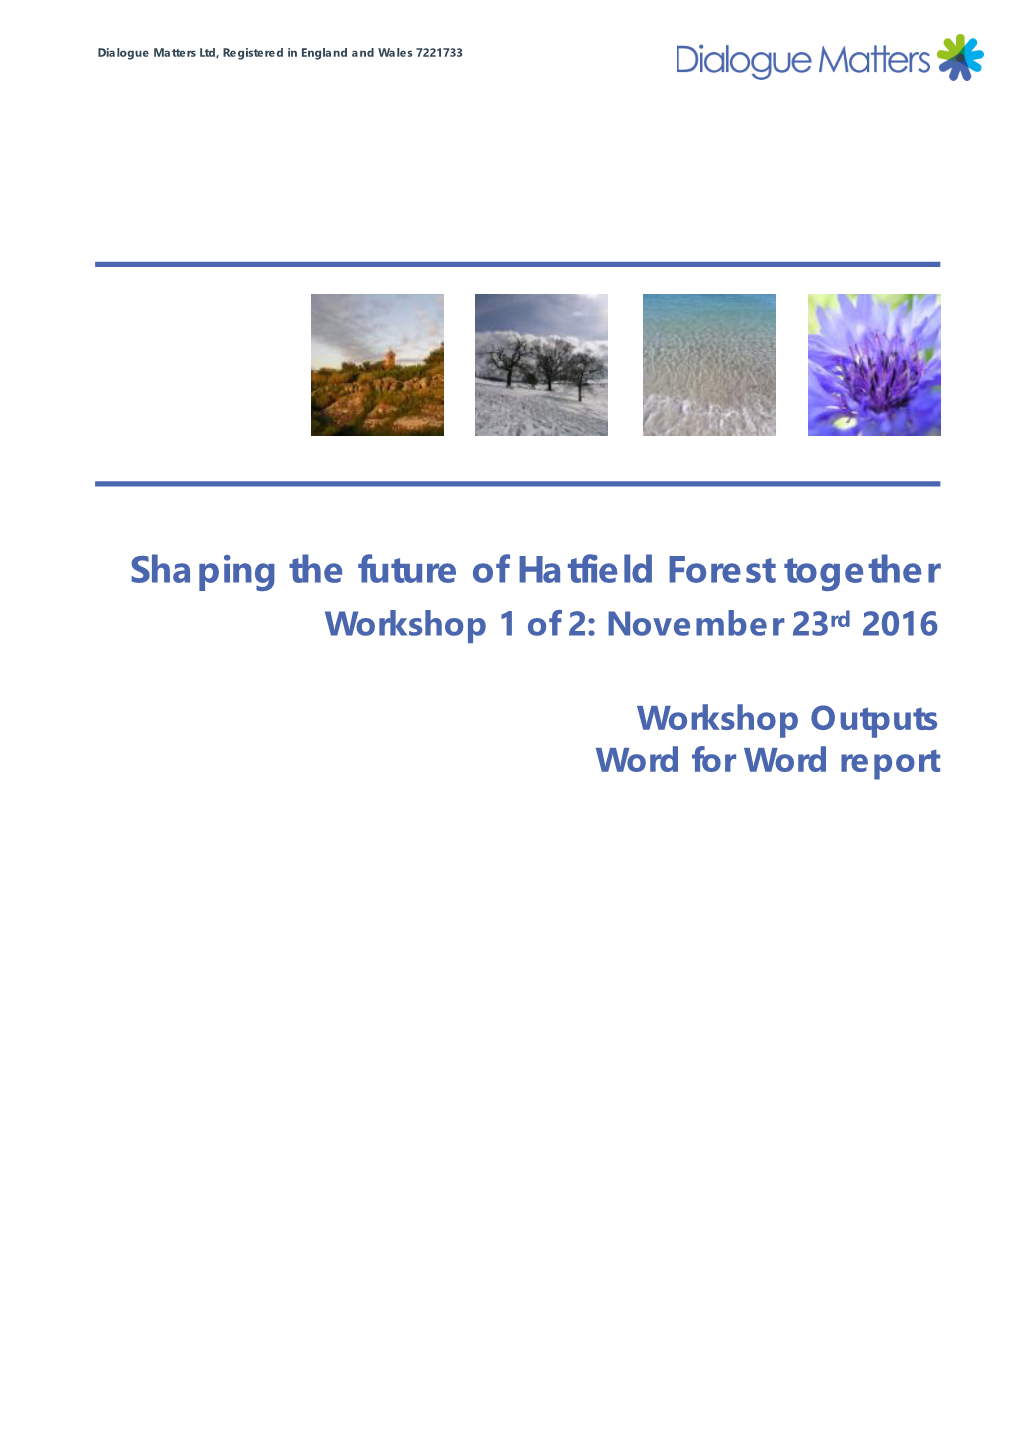 Shaping the Future of Hatfield Forest Together Workshop 1 of 2: November 23Rd 2016